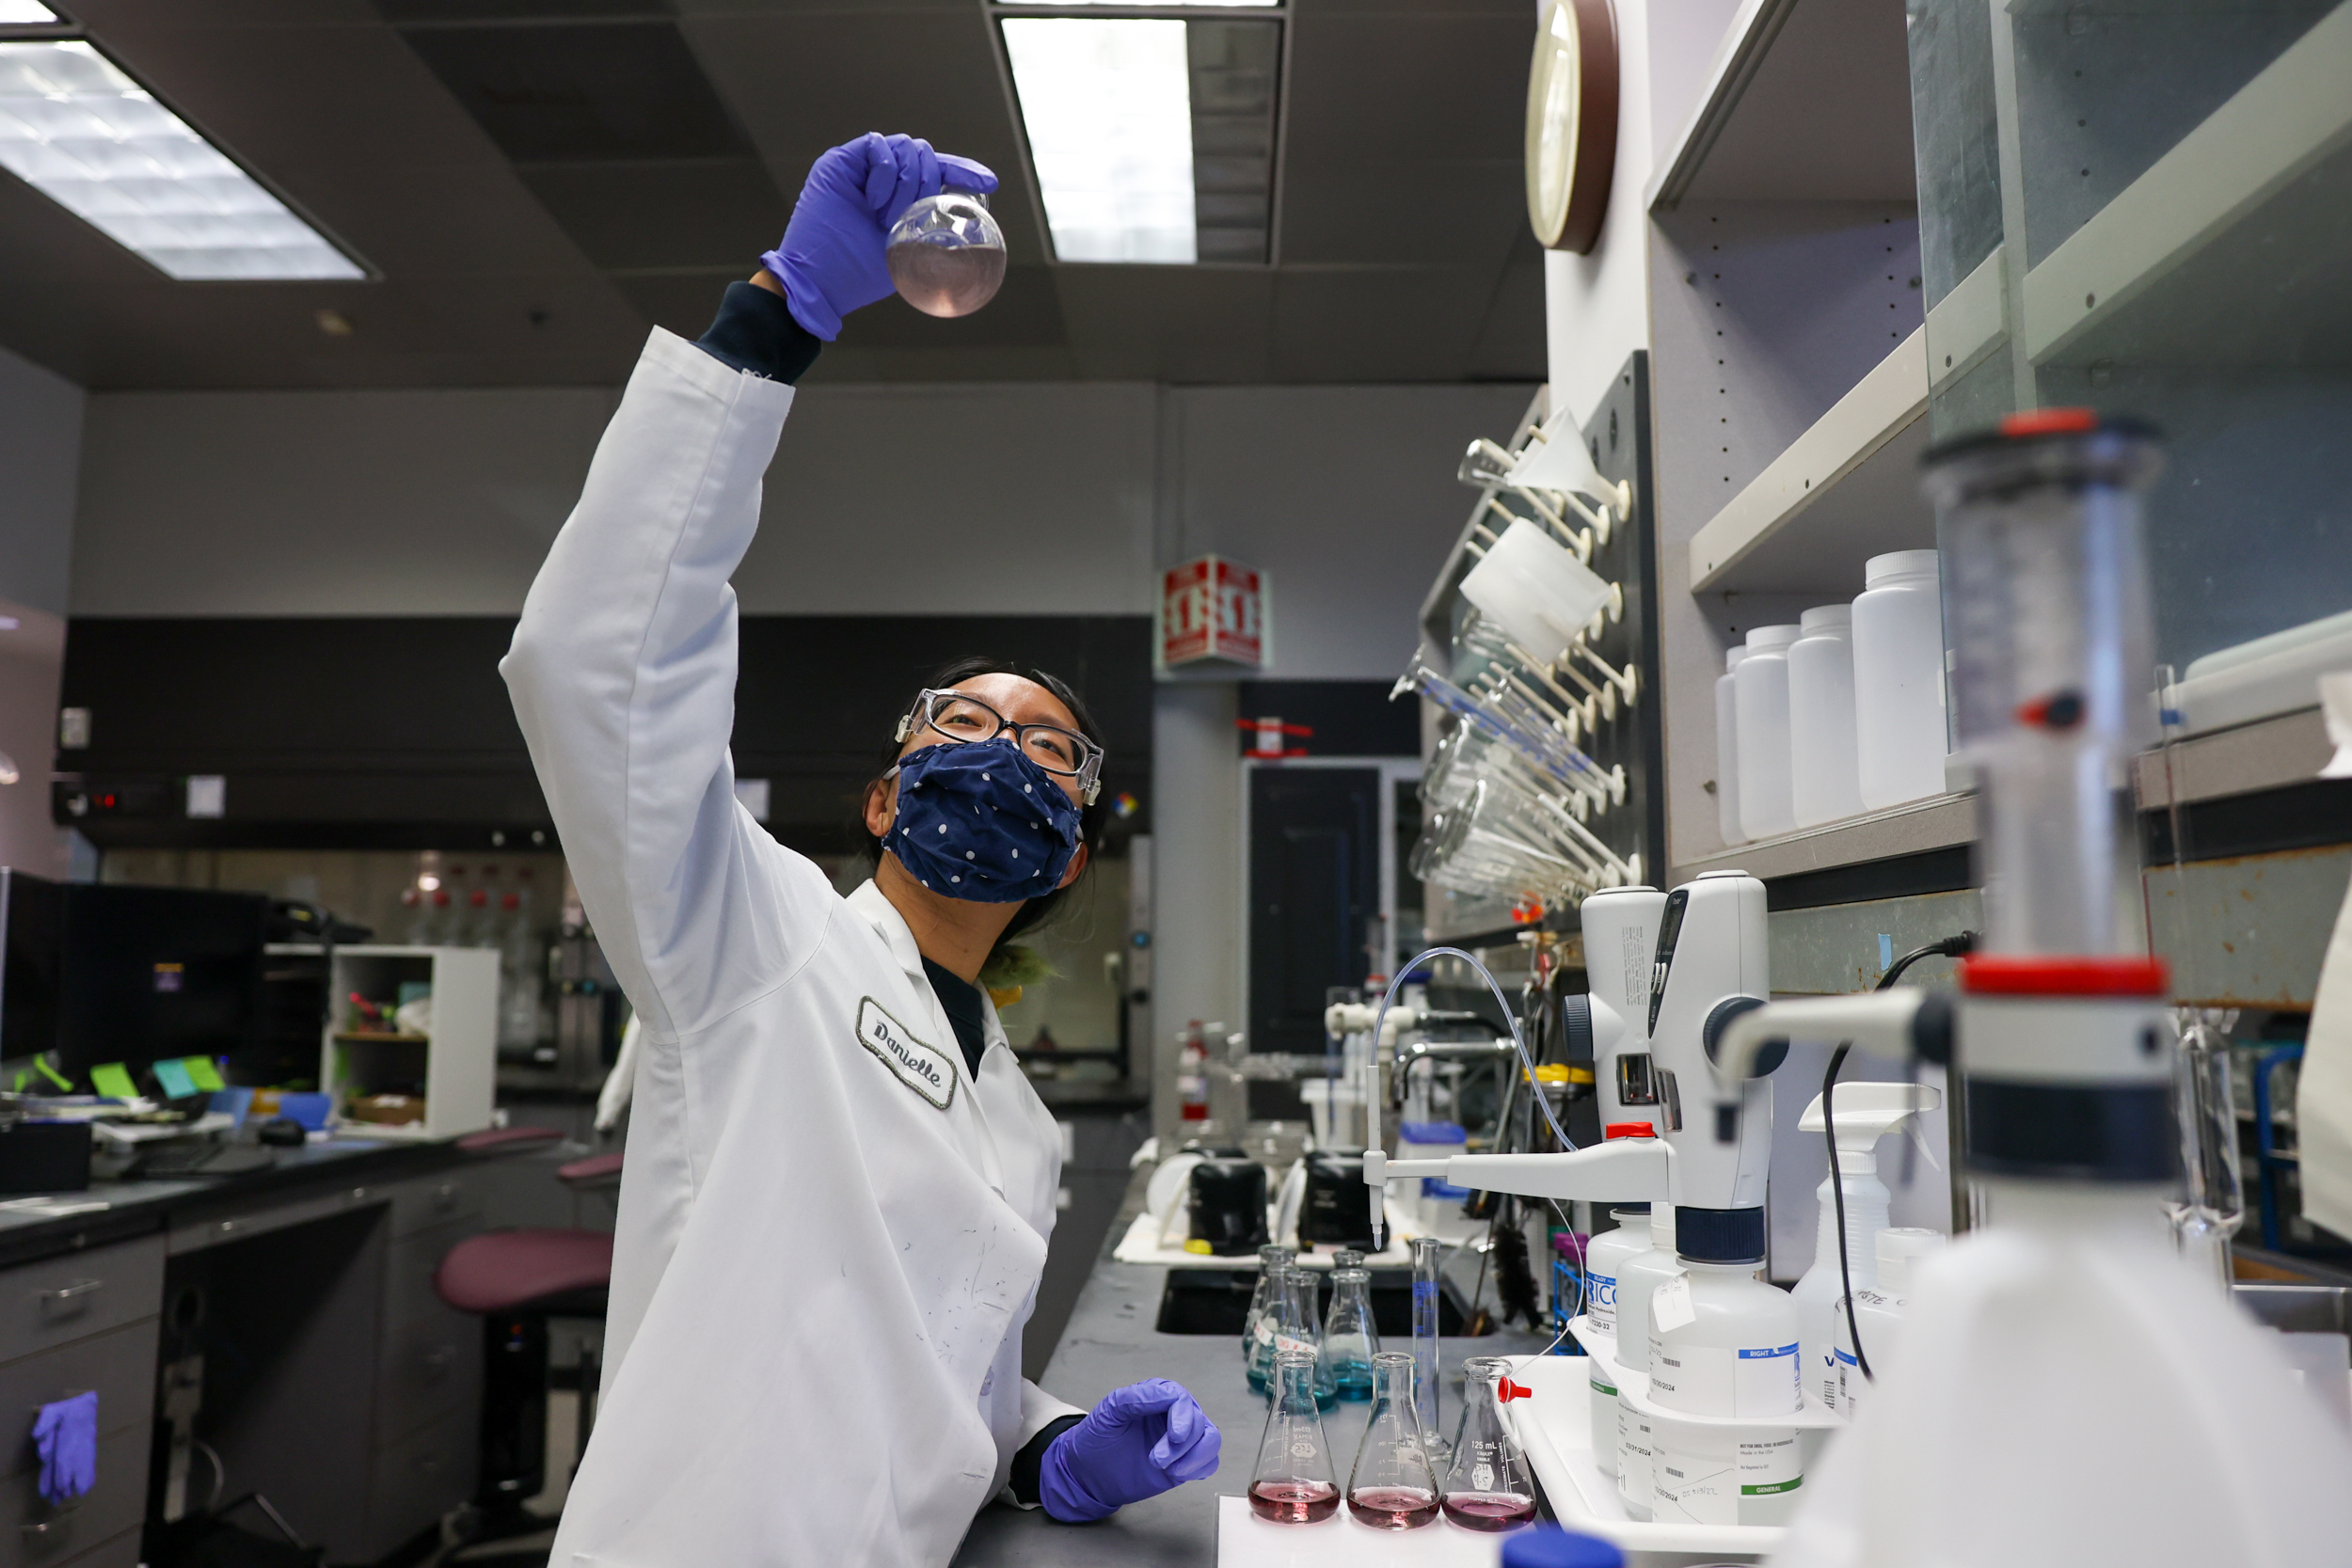 A woman in a lab coat examines a vial.